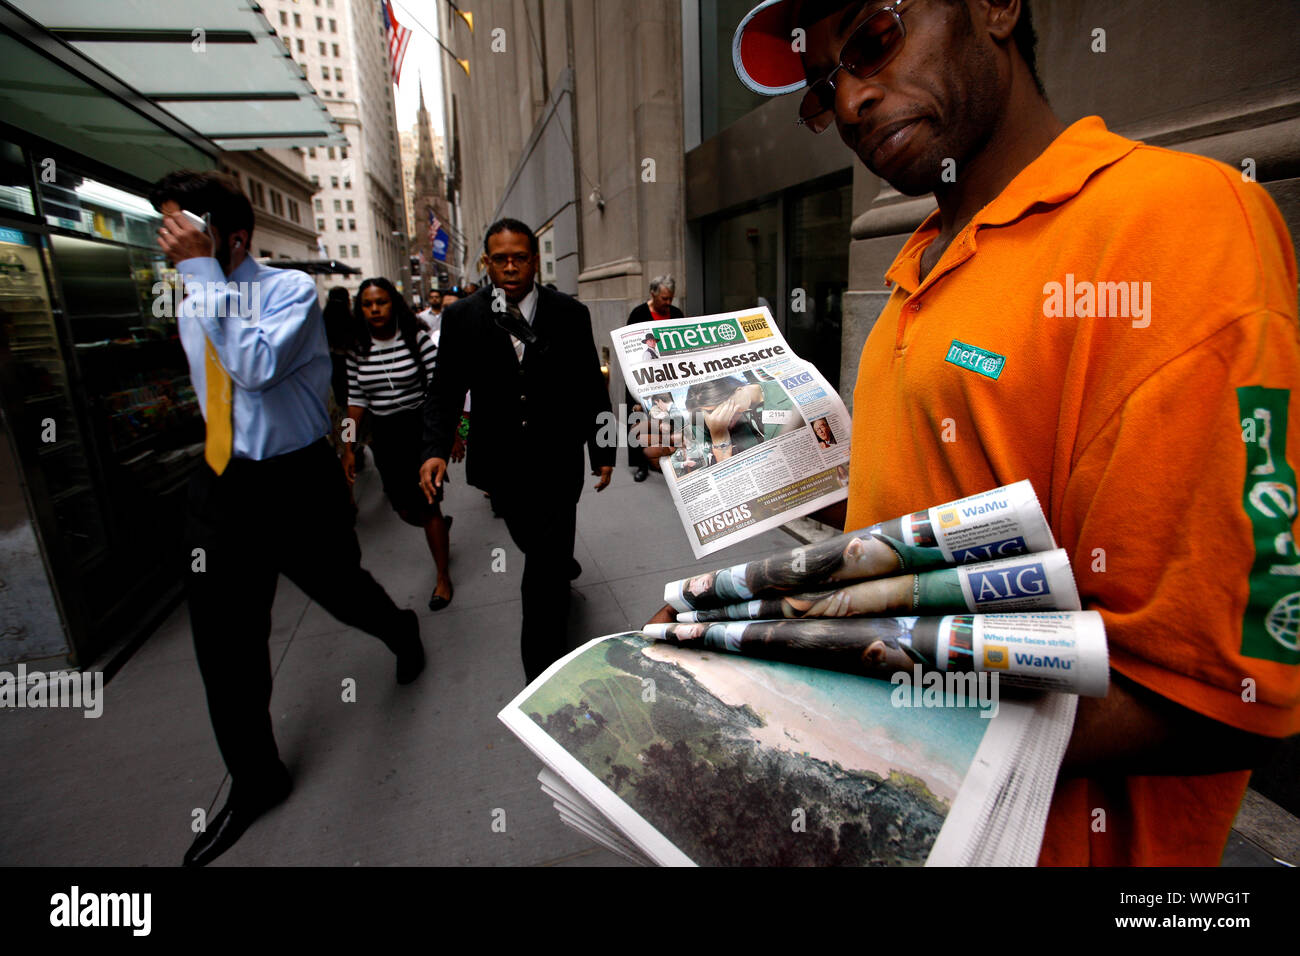 Trouble on Wall Street. A man hands out the Metro newspaper which has the headline 'Wall Street Massacre' on the front. The newspaper headline came after the start of the 2008 recession caused by failing housing market and subprime bundling scandal. Stock Photo